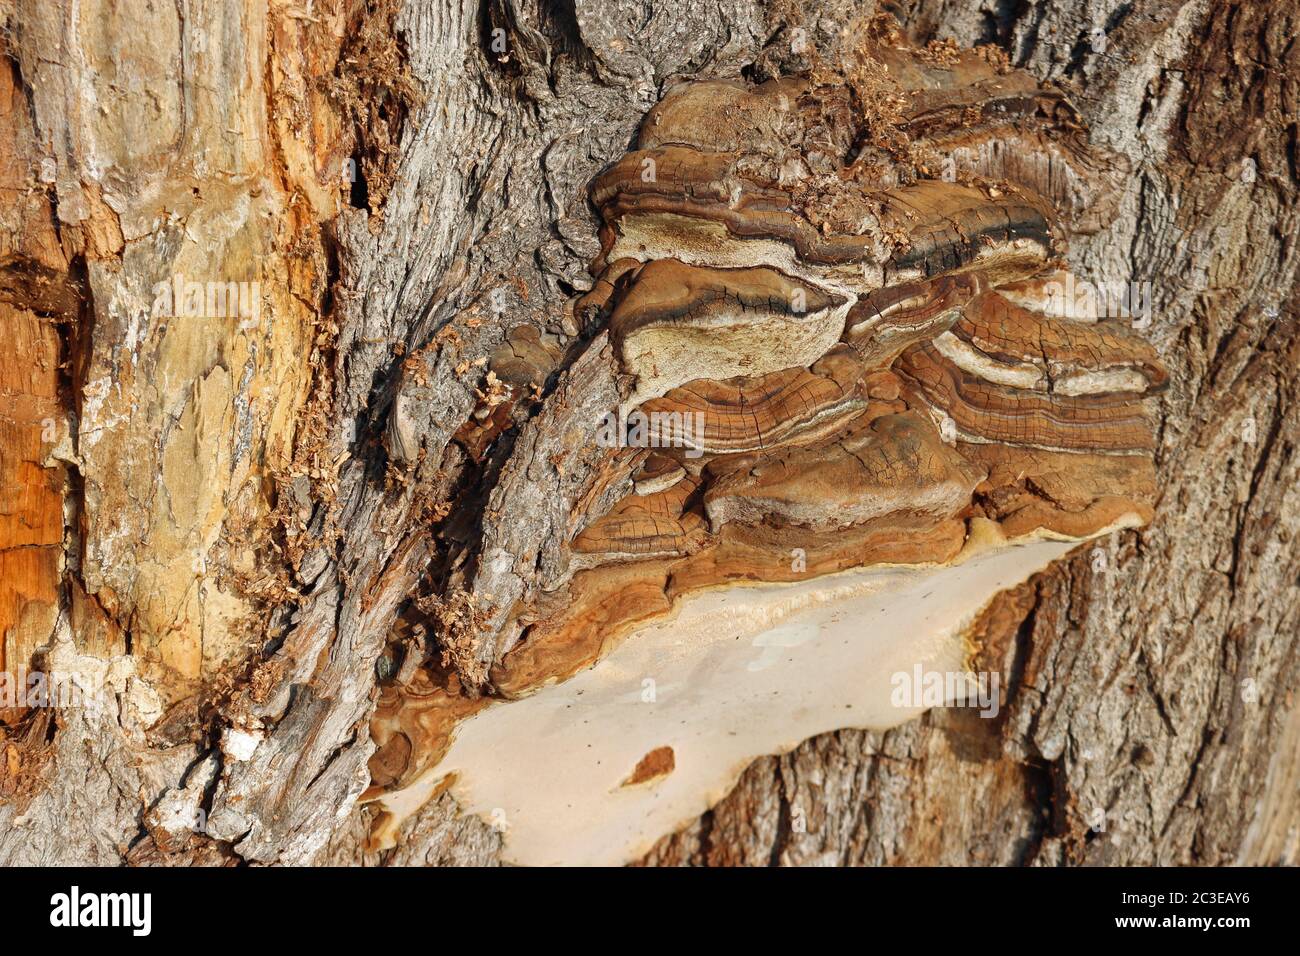 Brown and cracked polypore bracket fungus growing out of the side of a decaying tree trunk with no background. Stock Photo